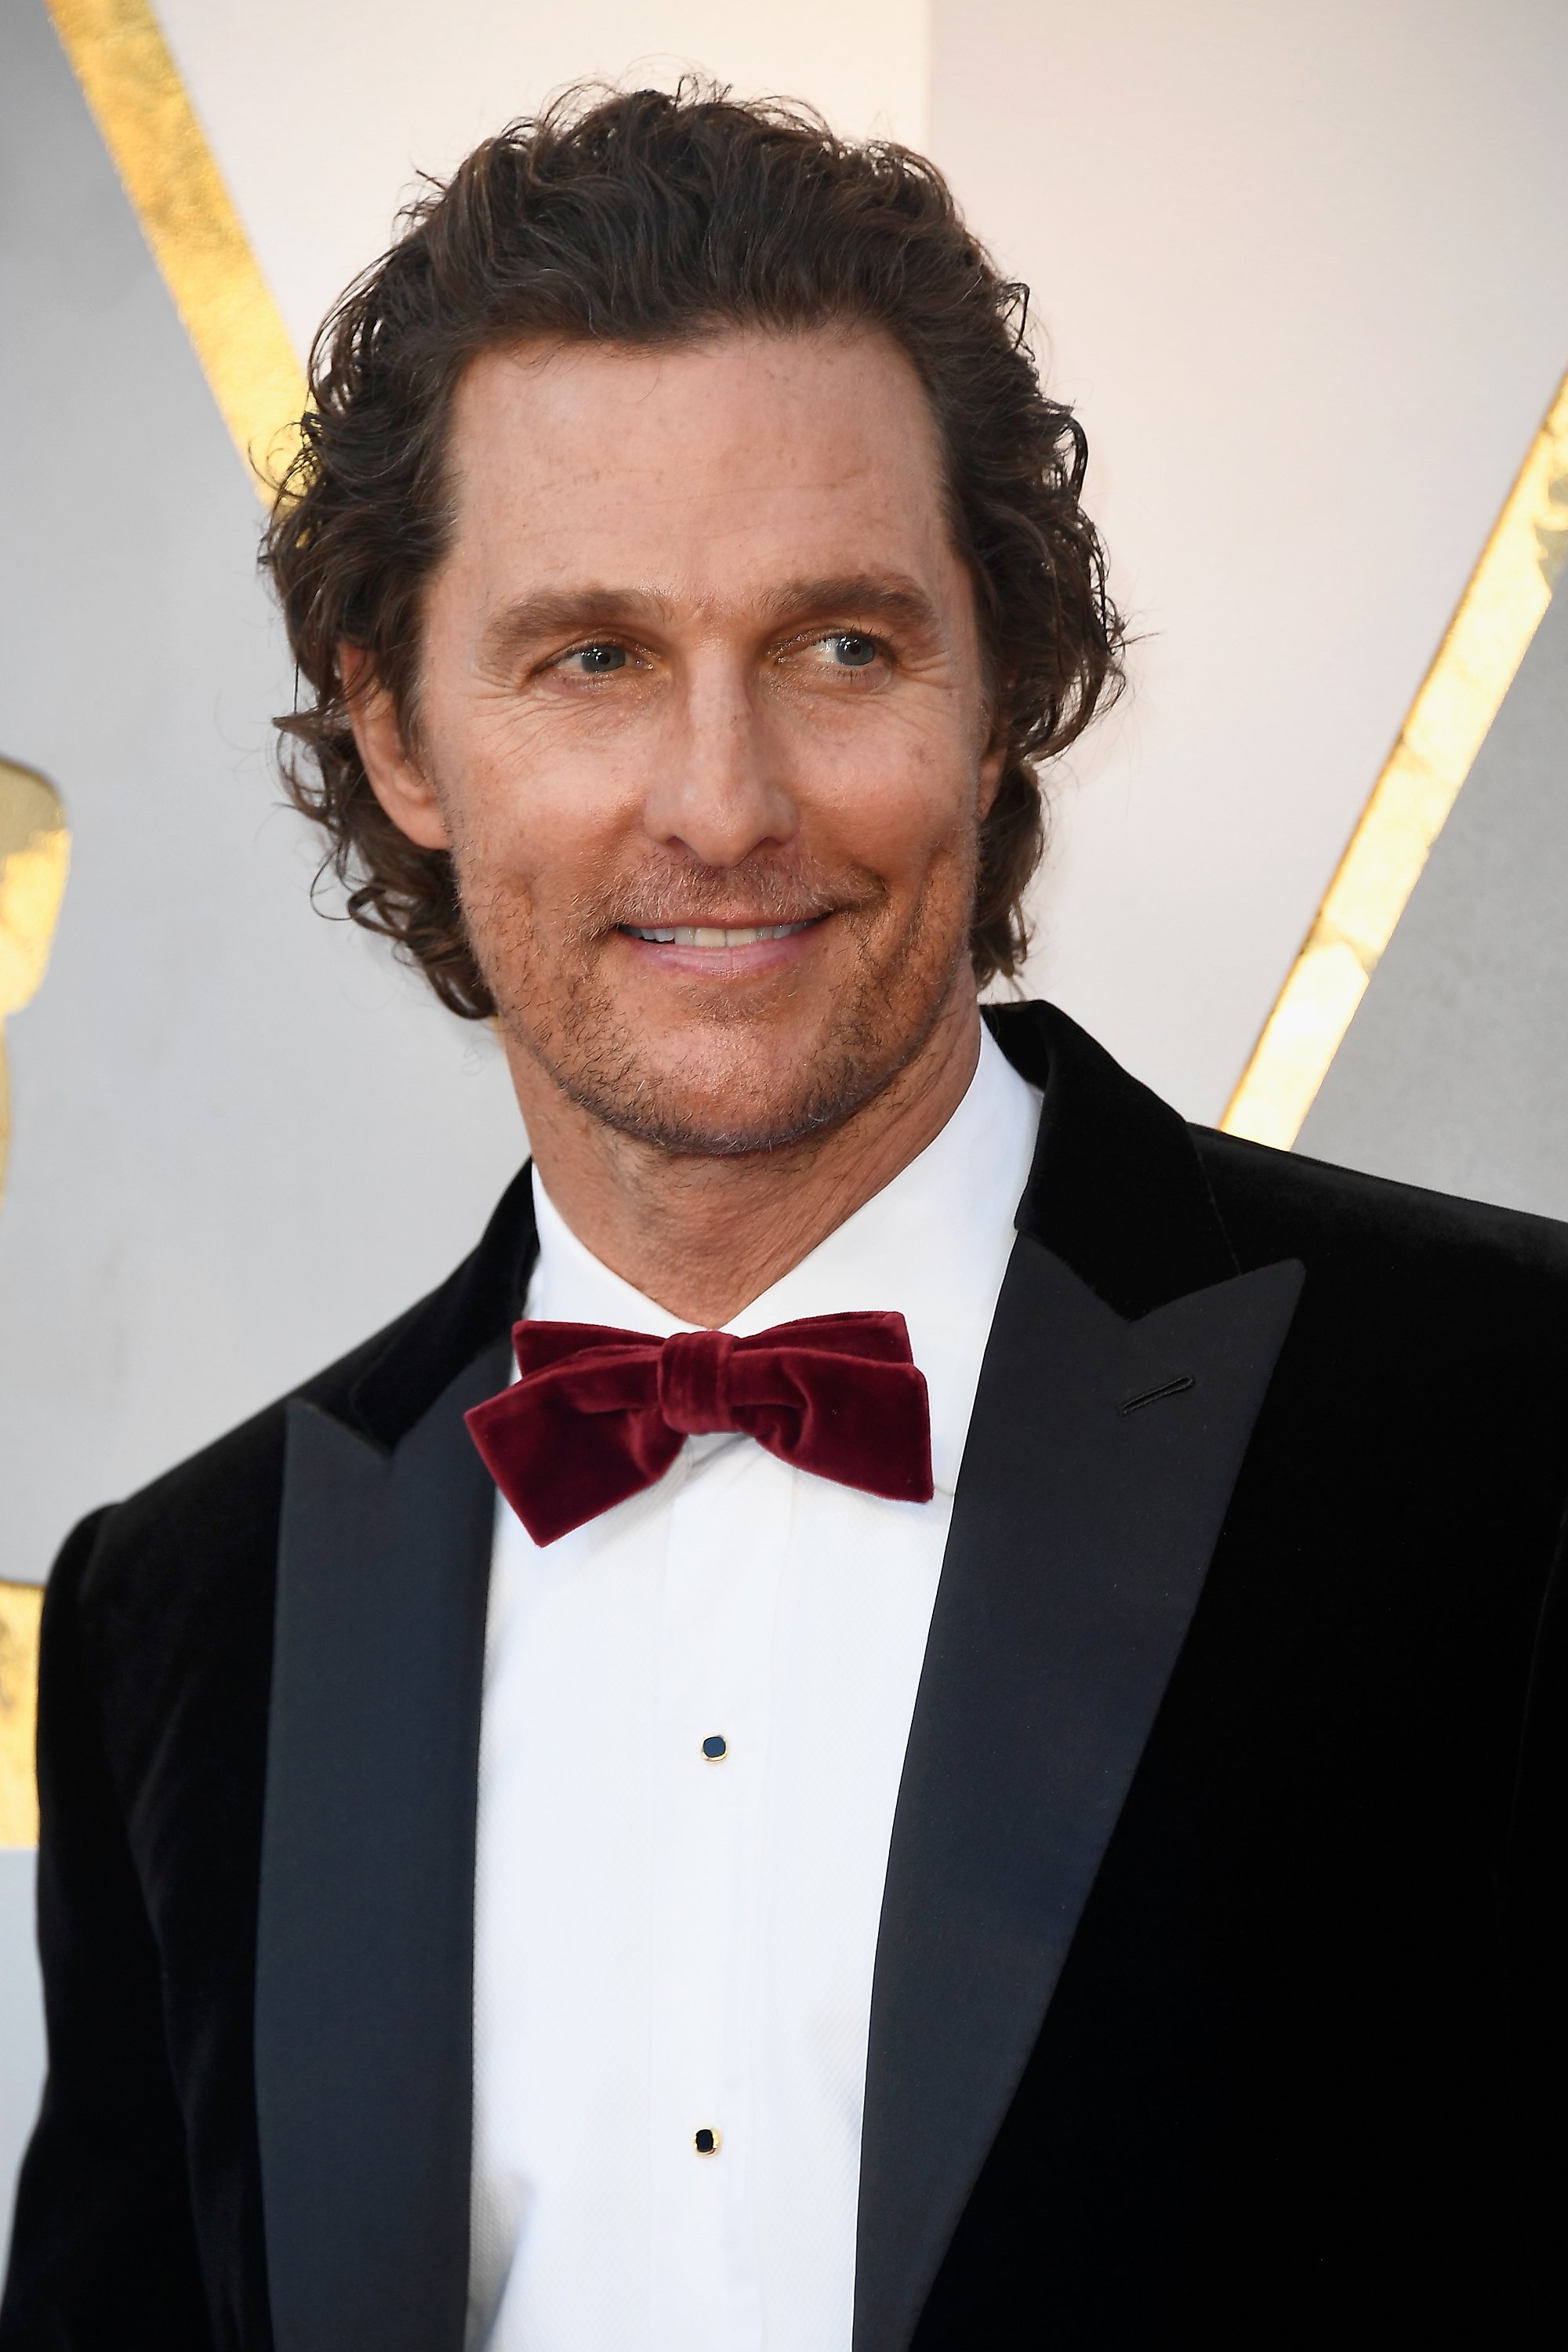 Matthew McConaughey attends the 90th Annual Academy Awards at Hollywood & Highland Center on March 4, 2018, in Hollywood, California. | Source: Getty Images.